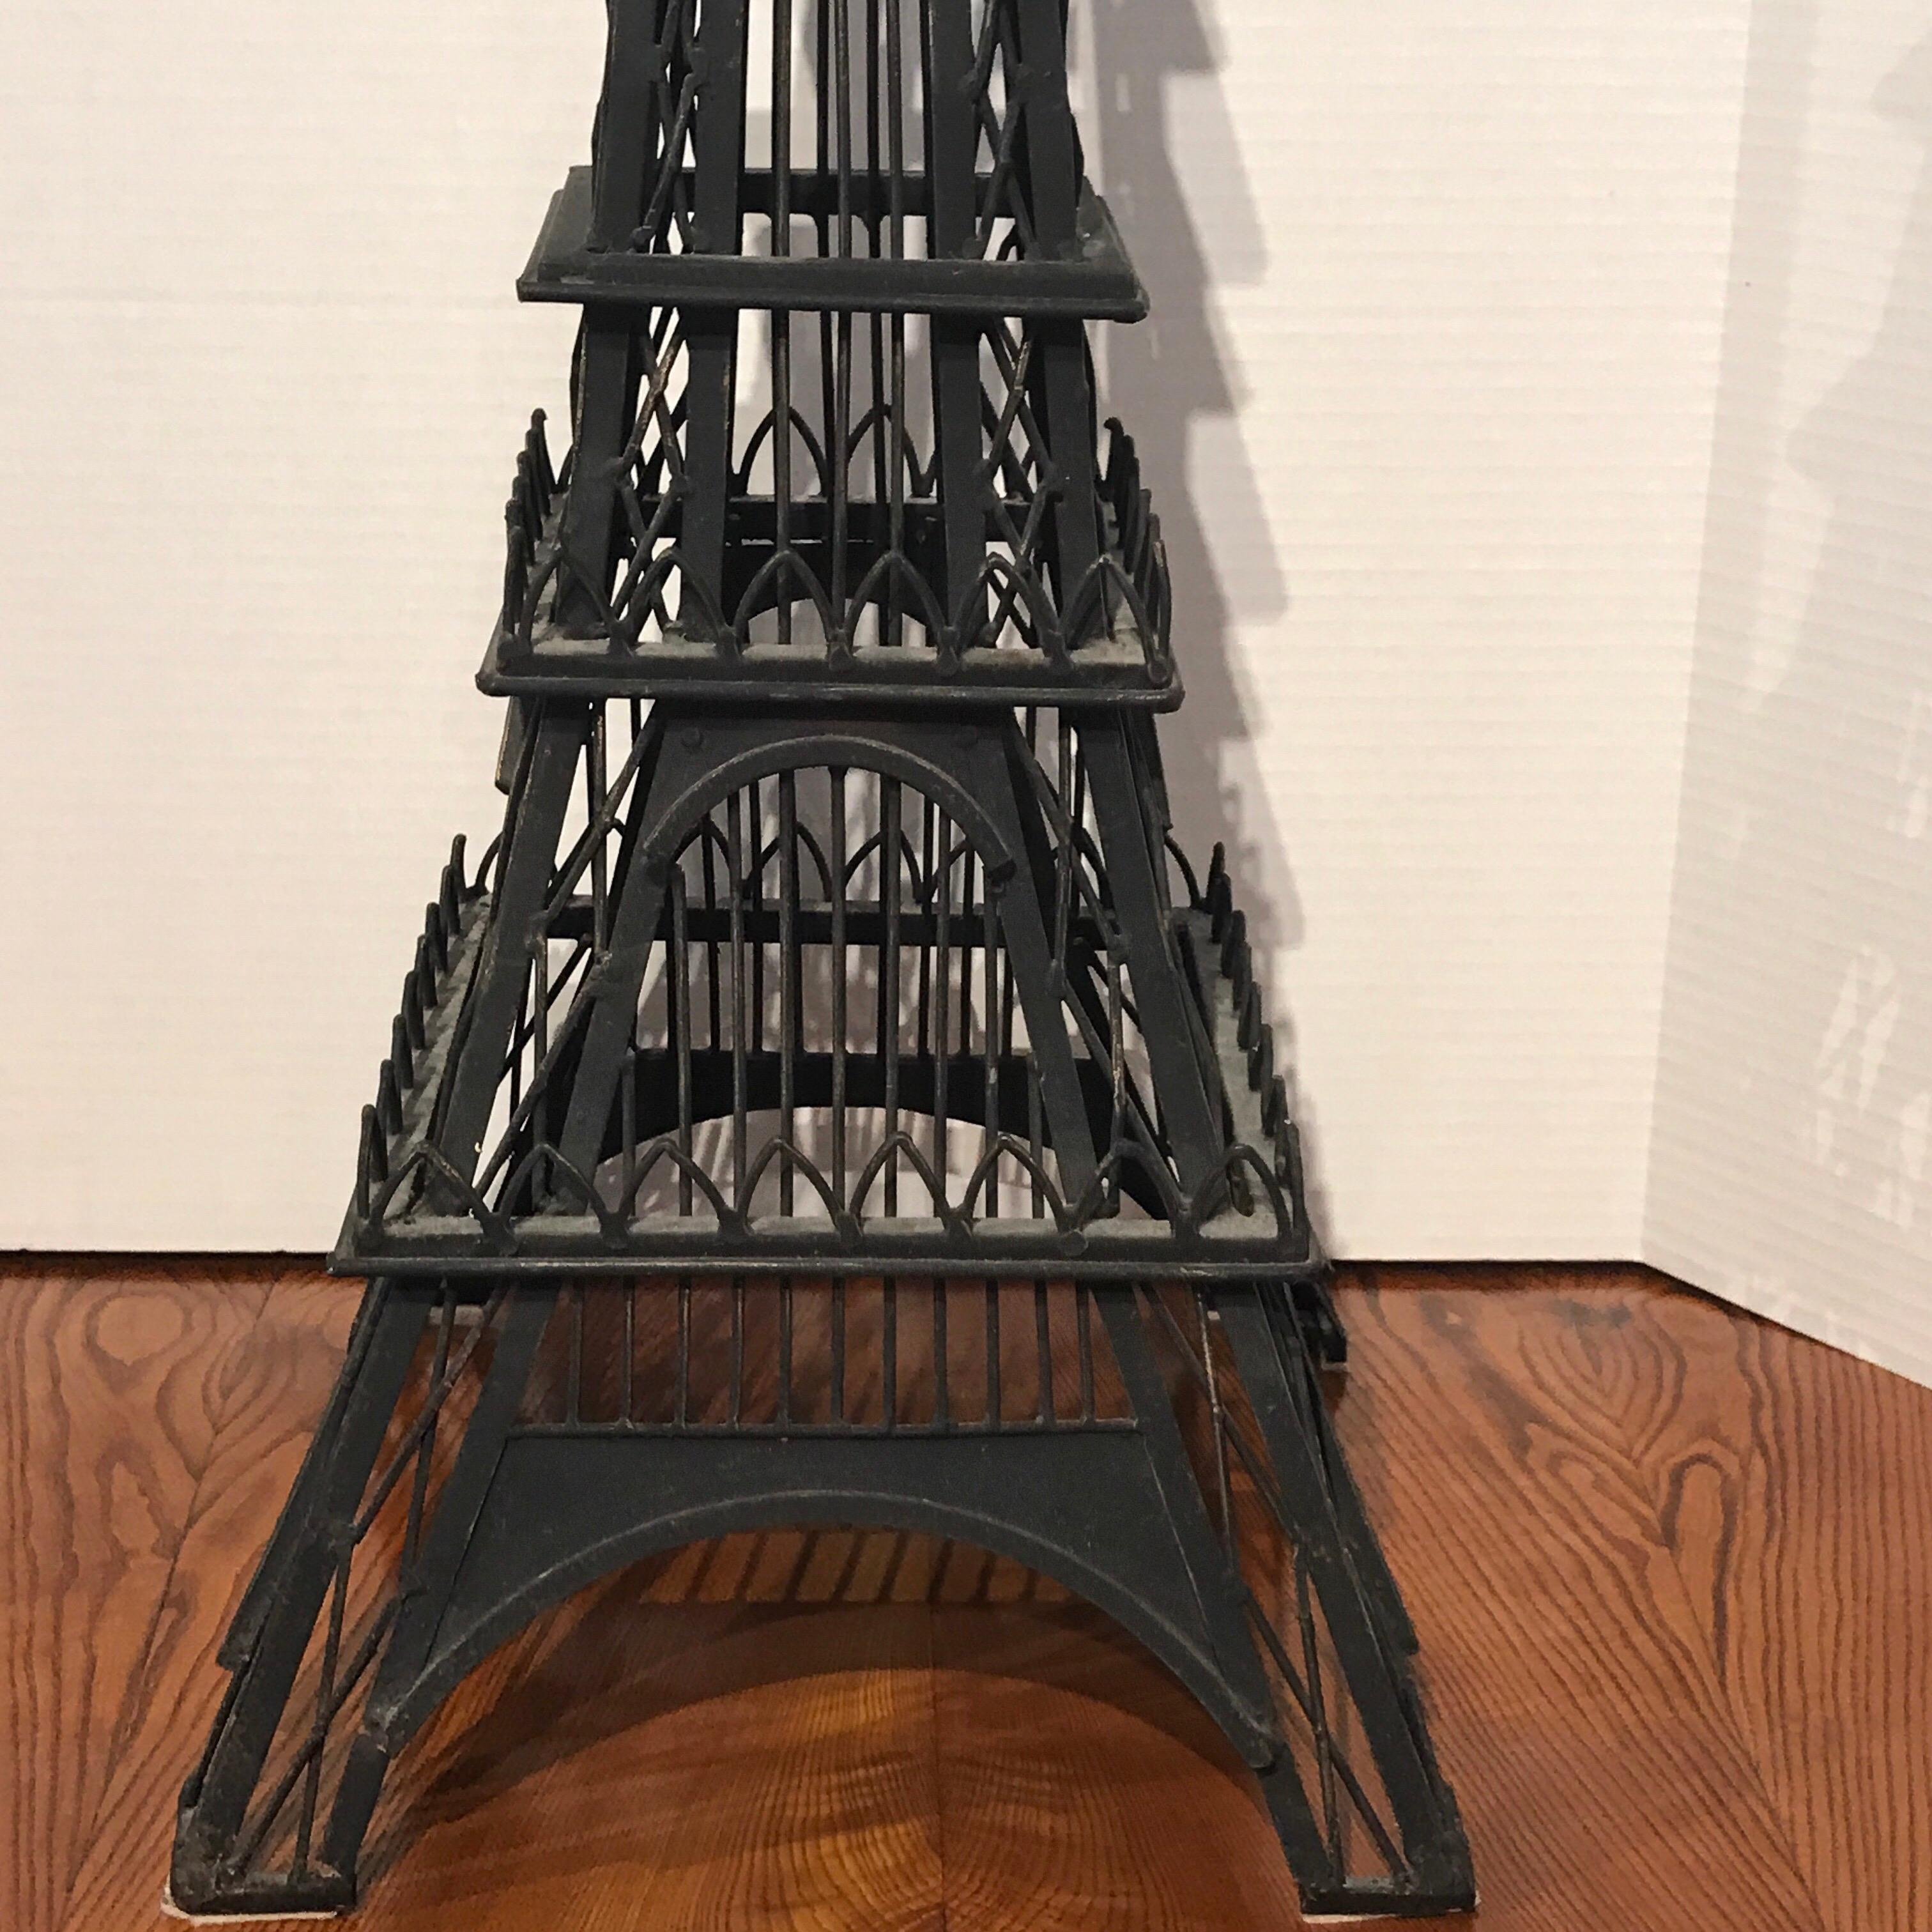 Grand Tour model of the Eiffel Tower, now as a lamp, newly wired. The architectural model stands 30